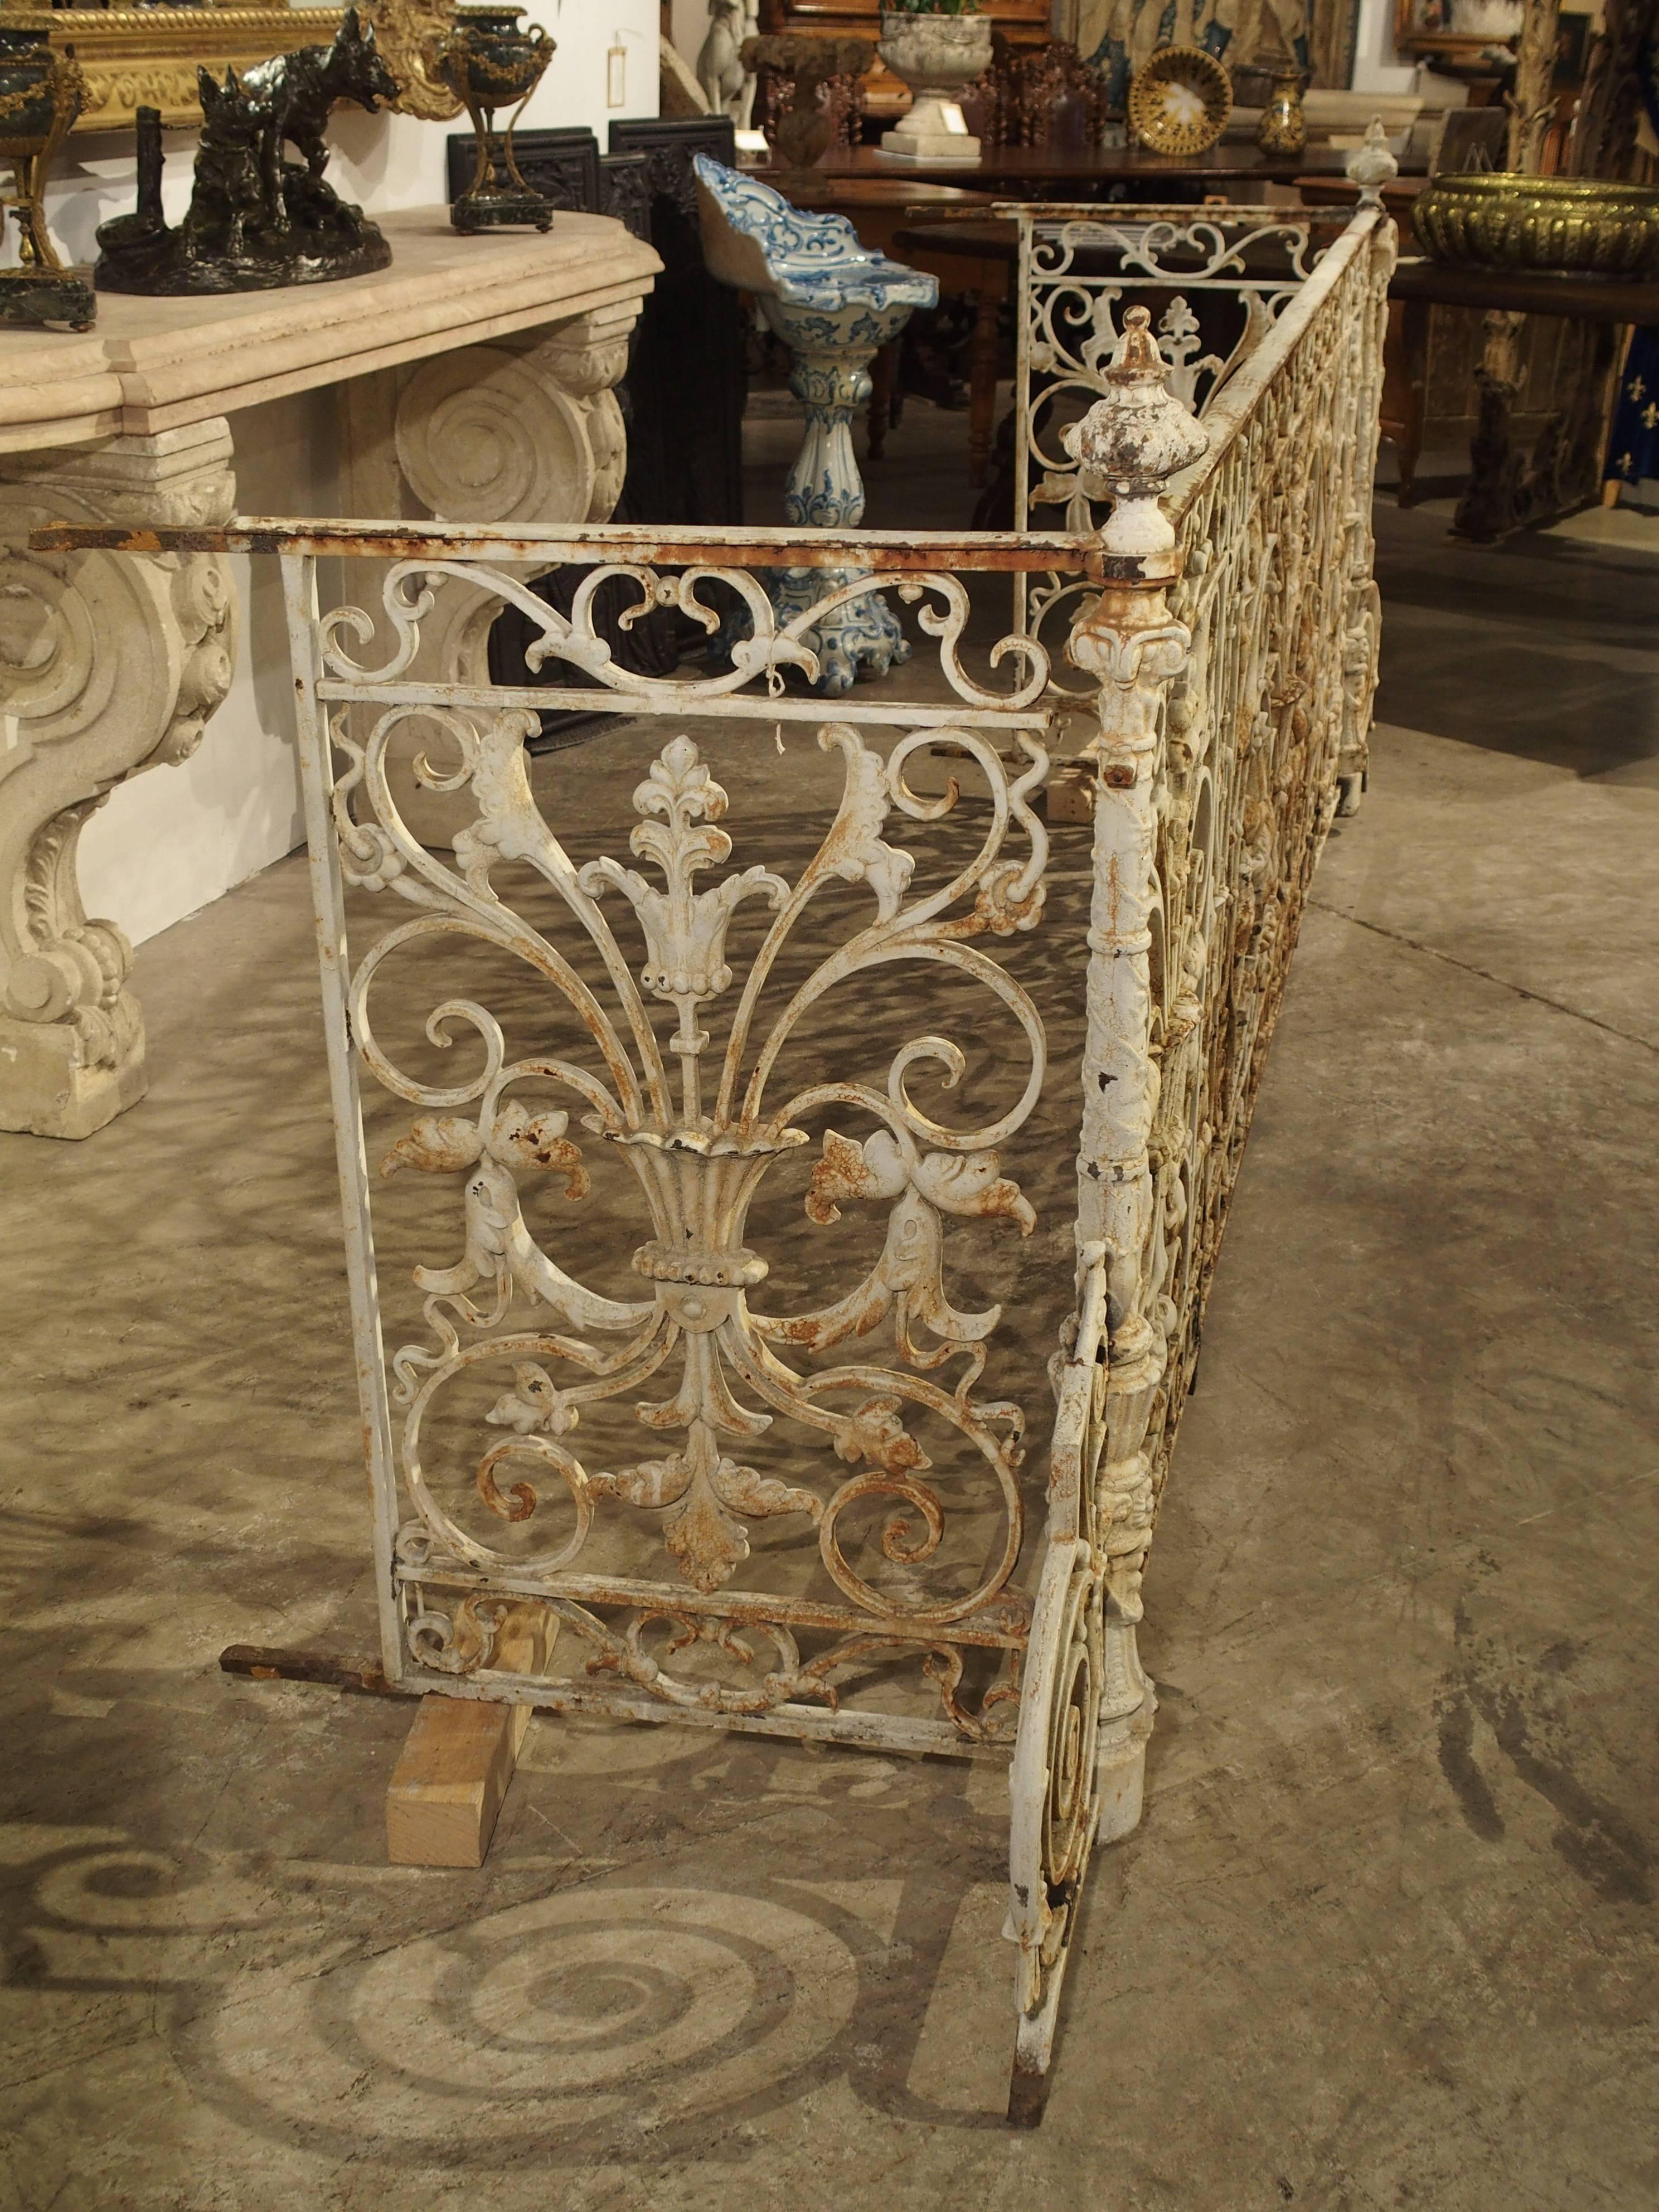 This is a stunning antique French balcony gate from the South of France. It was made in the mid to late 1800s, and its total length is over 11 feet! It would have been on a large and ornate building facade. The railing is made up of a series of